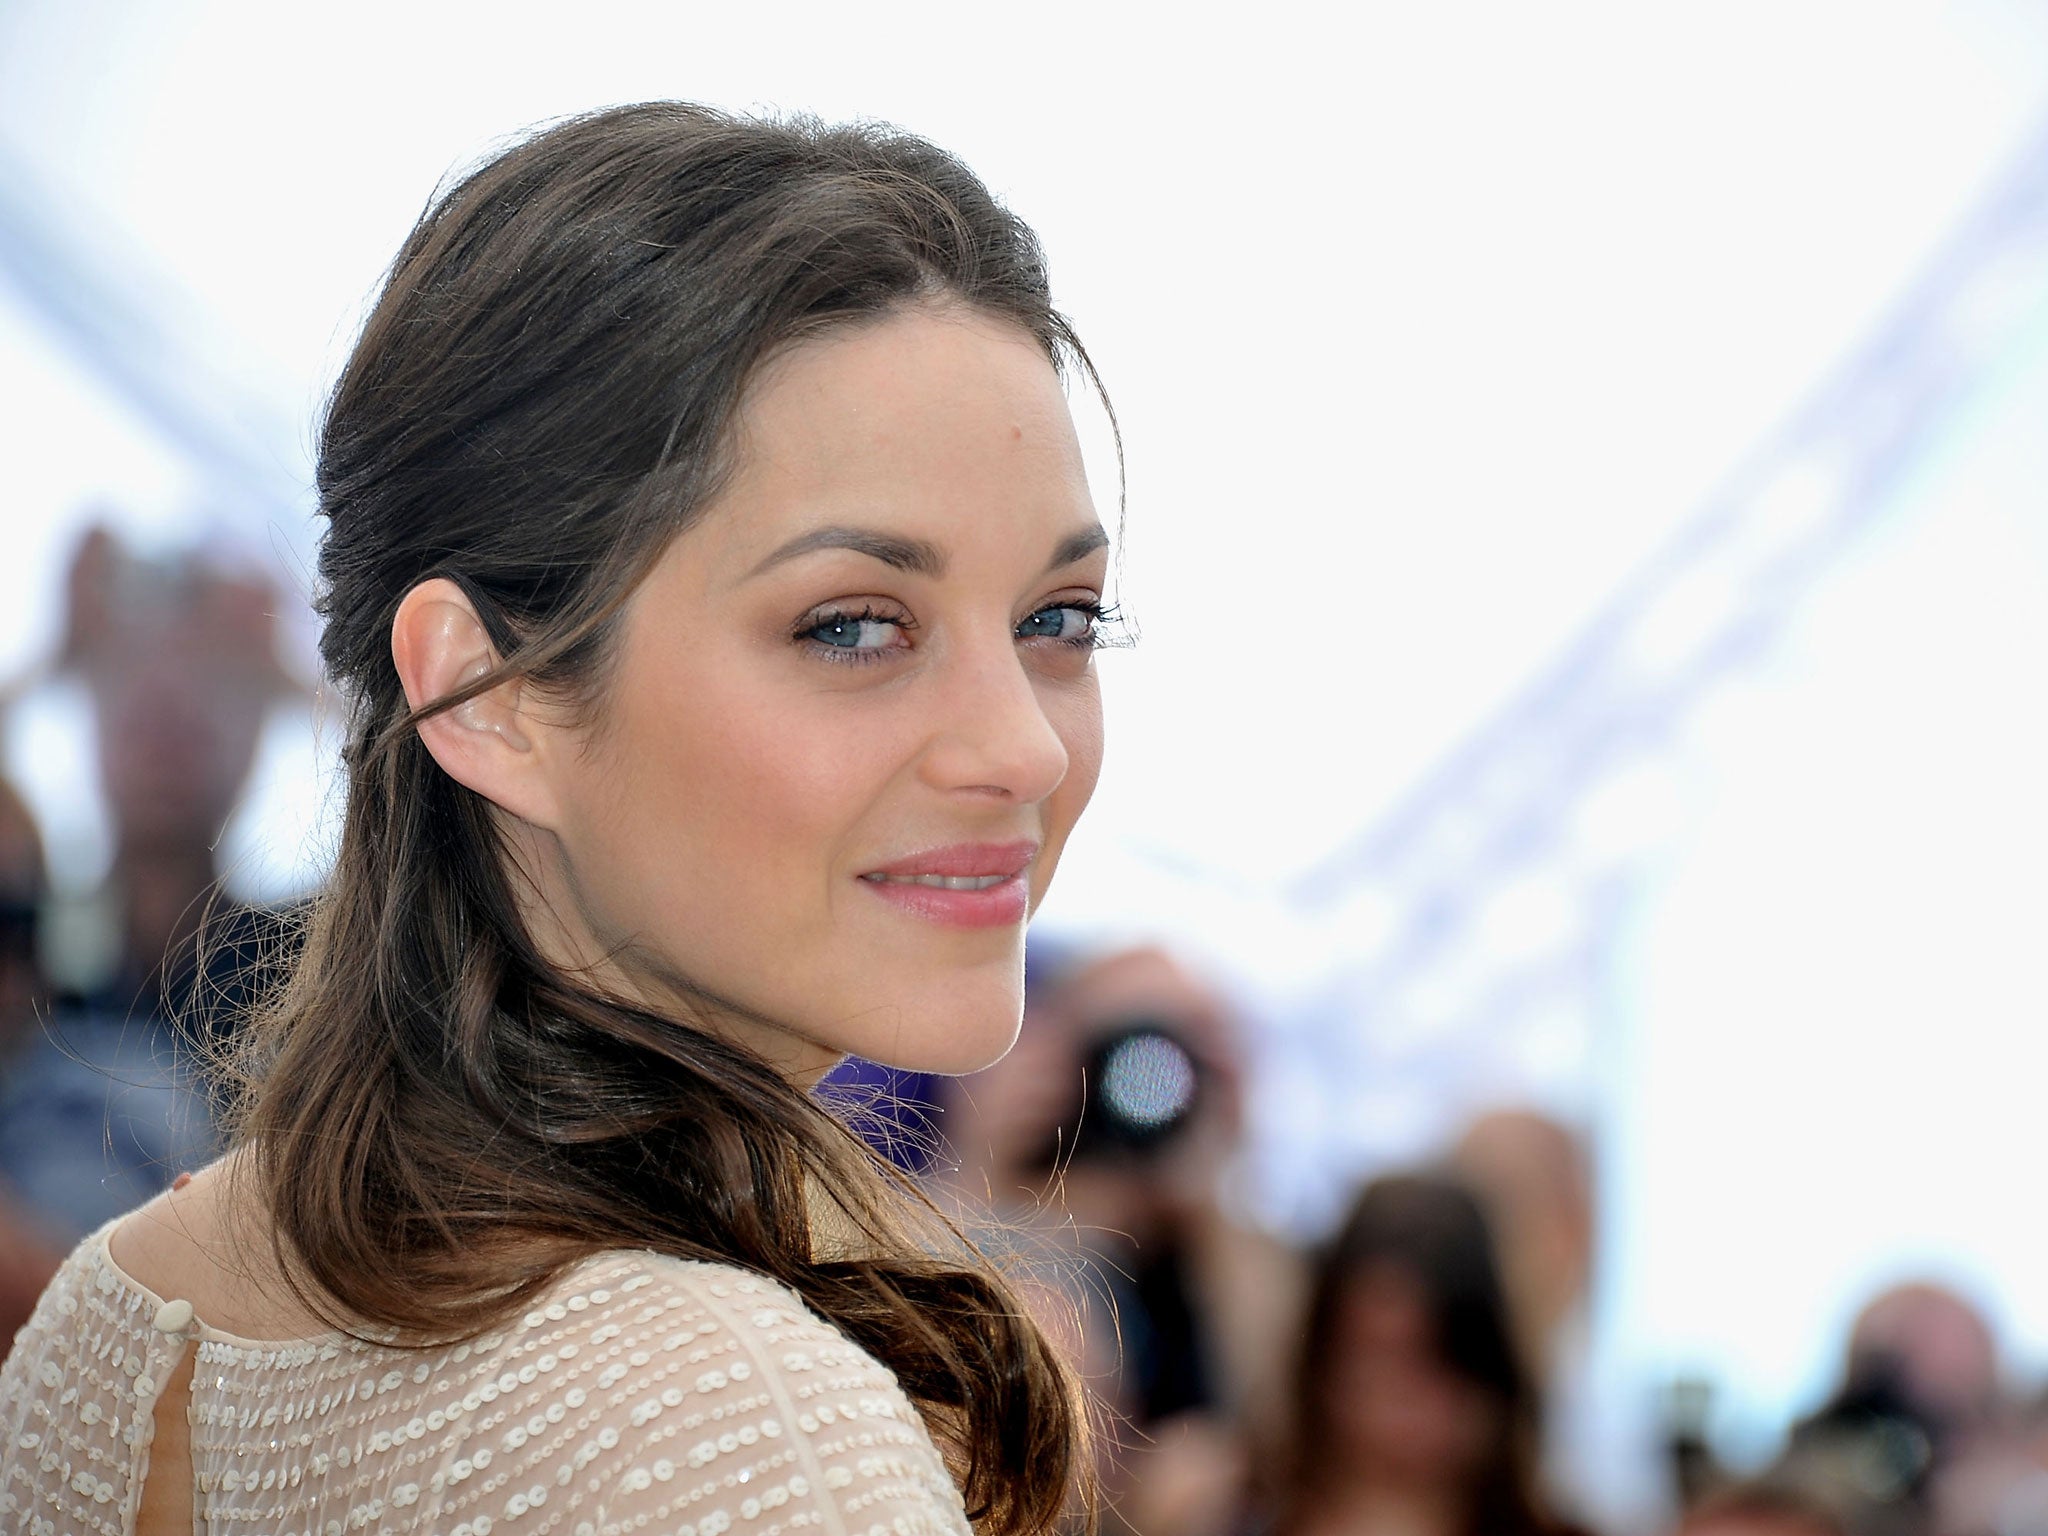 Marion Cotillard, pictured here in 2012